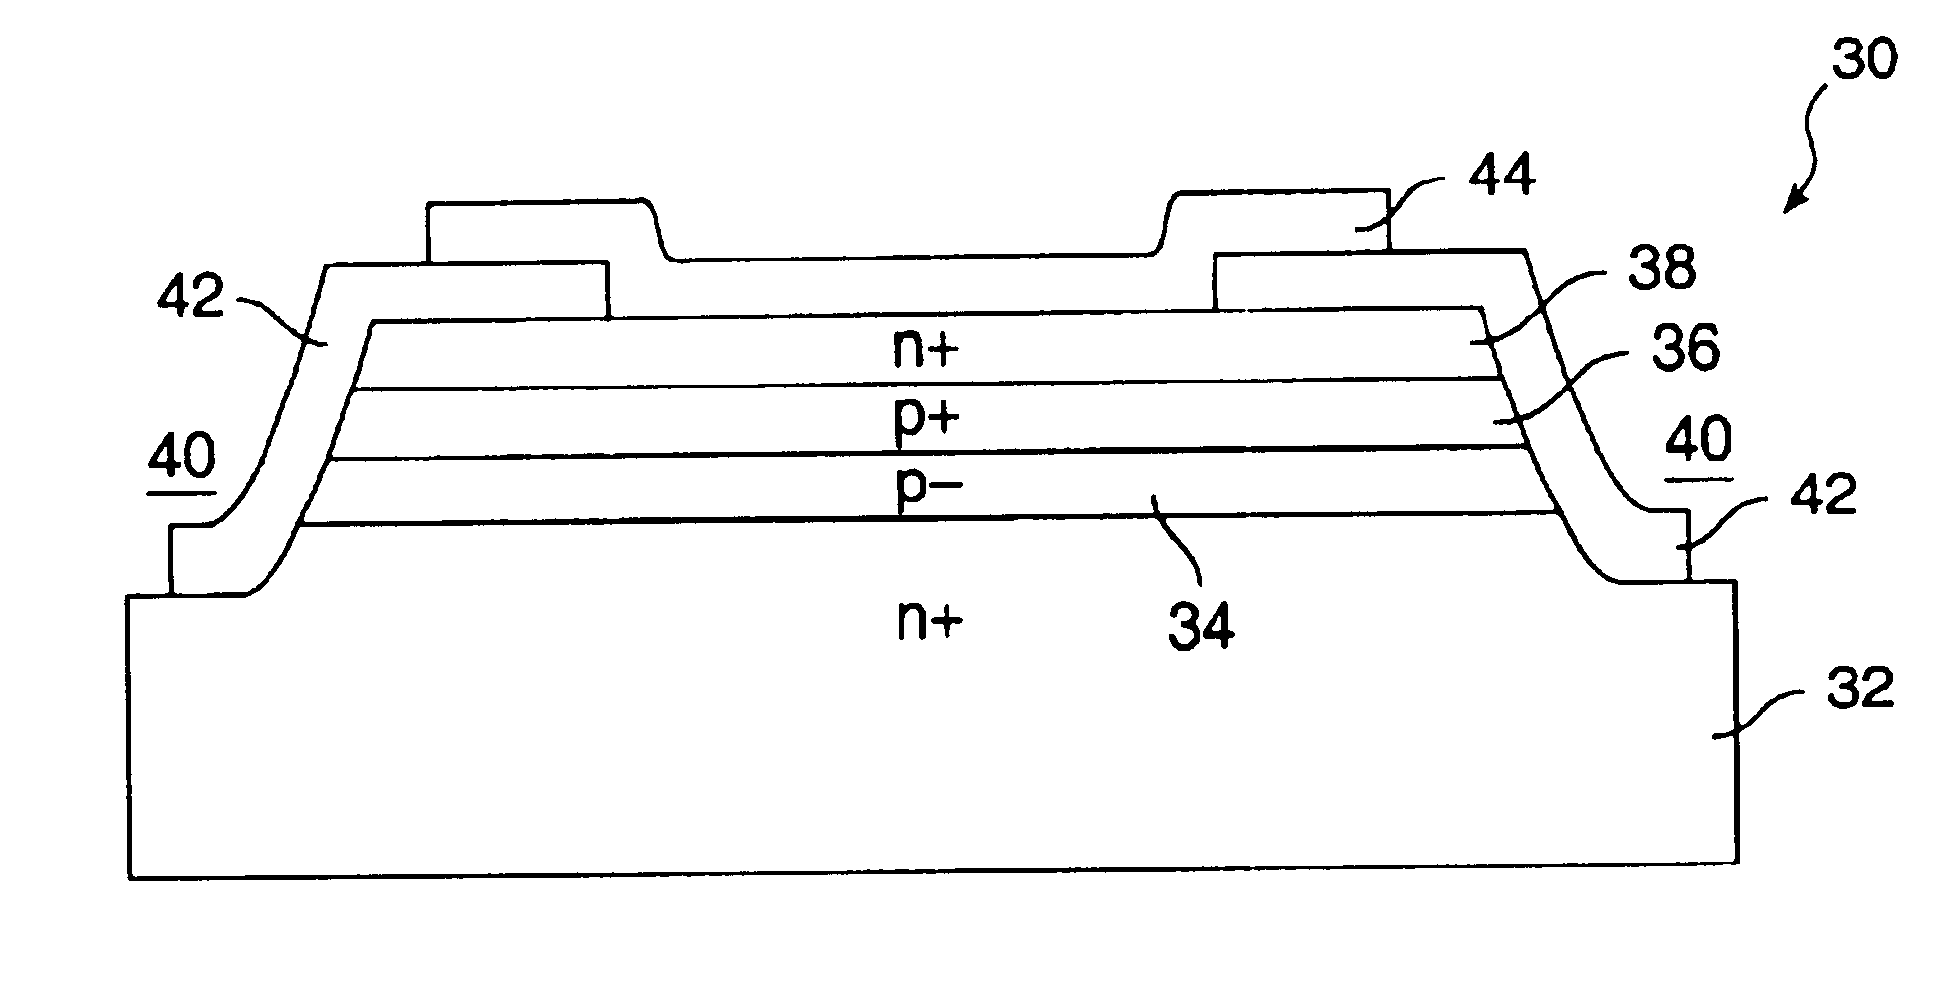 Low-voltage punch-through transient suppressor employing a dual-base structure